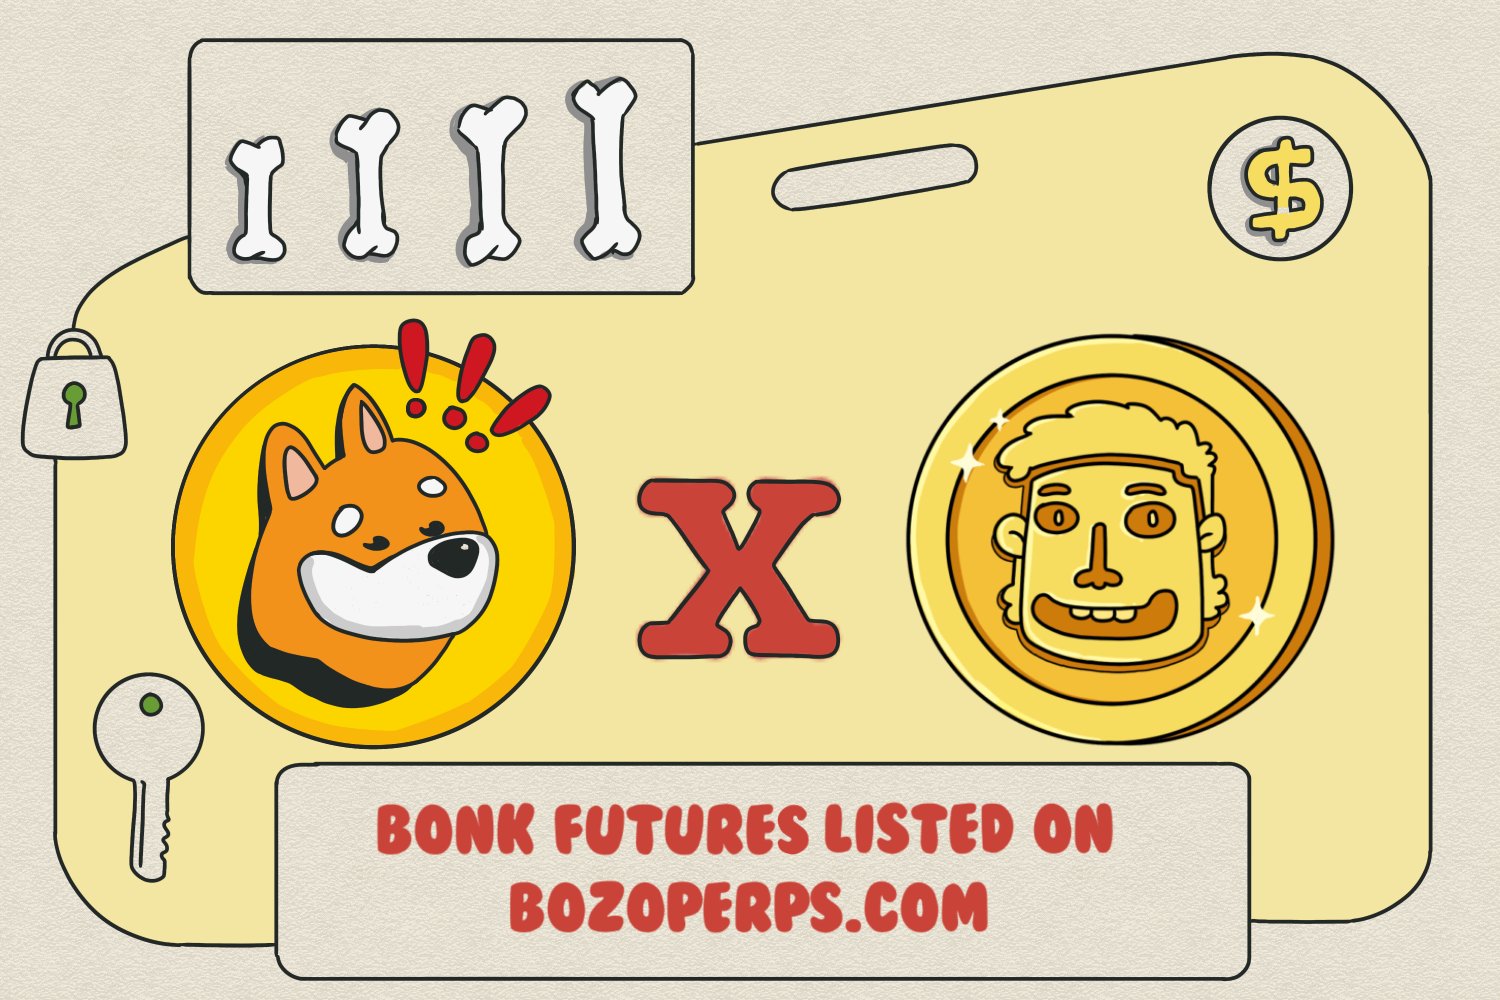  Official Site: Play Bonk Here!